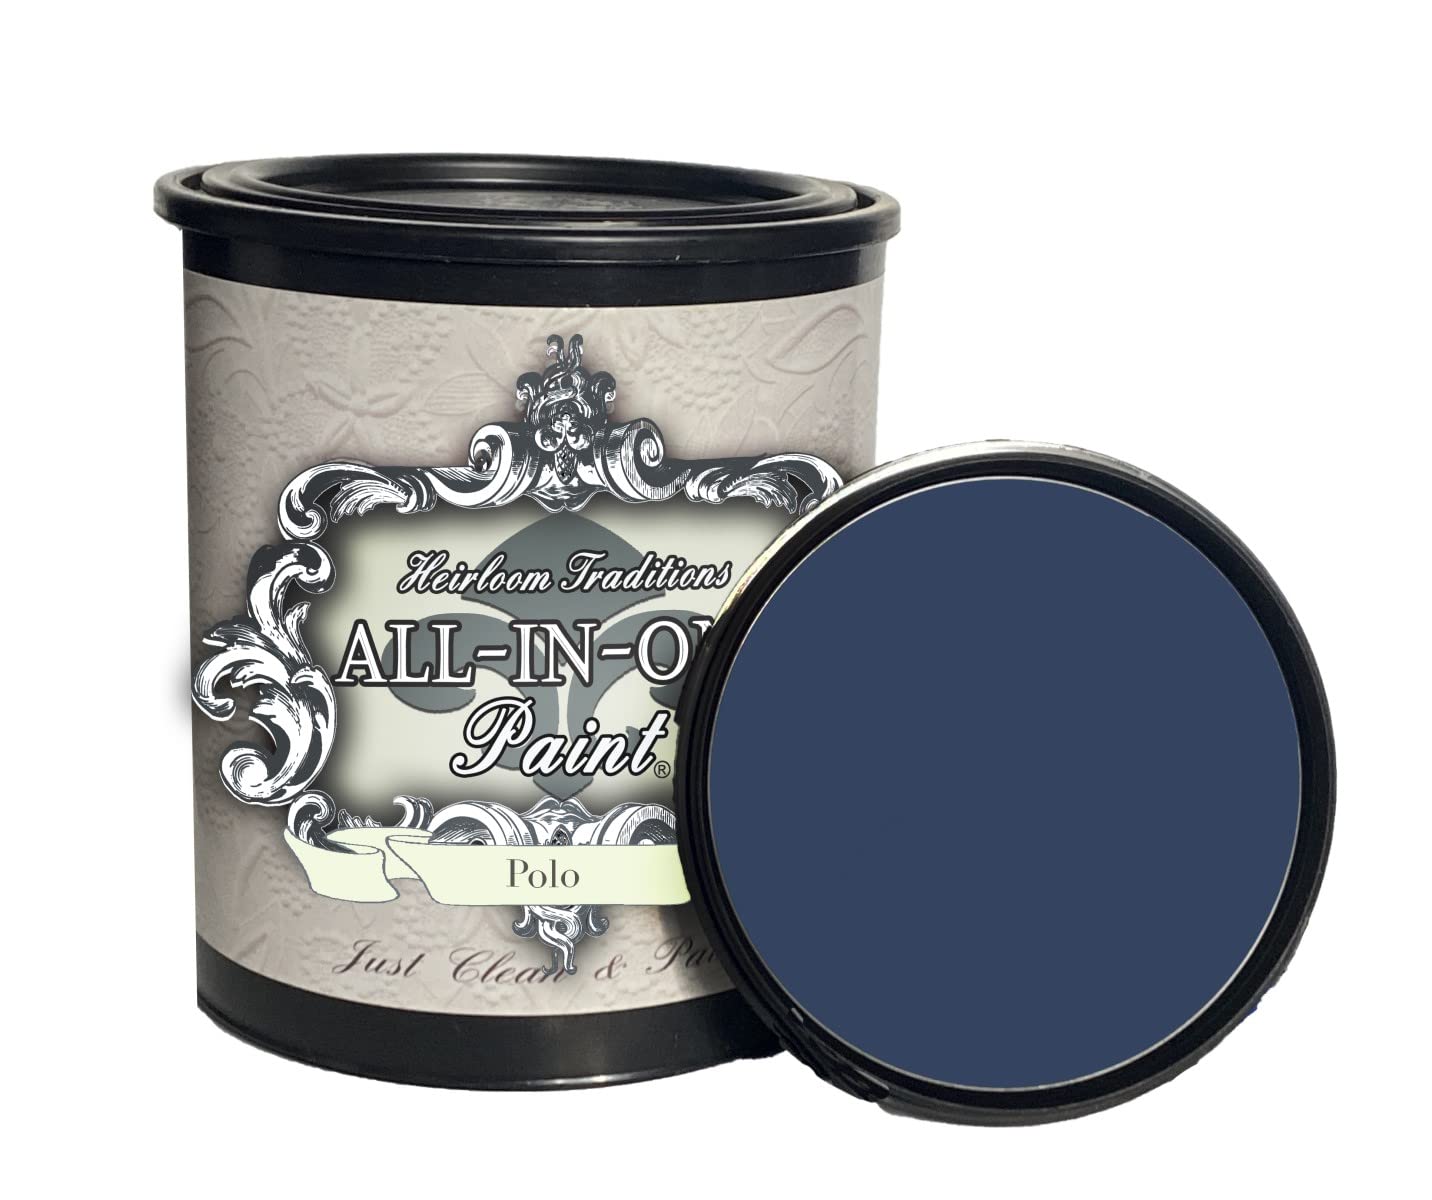 Heirloom Traditions Paint ALL-IN-ONE-Farbe von Heirloom Traditions